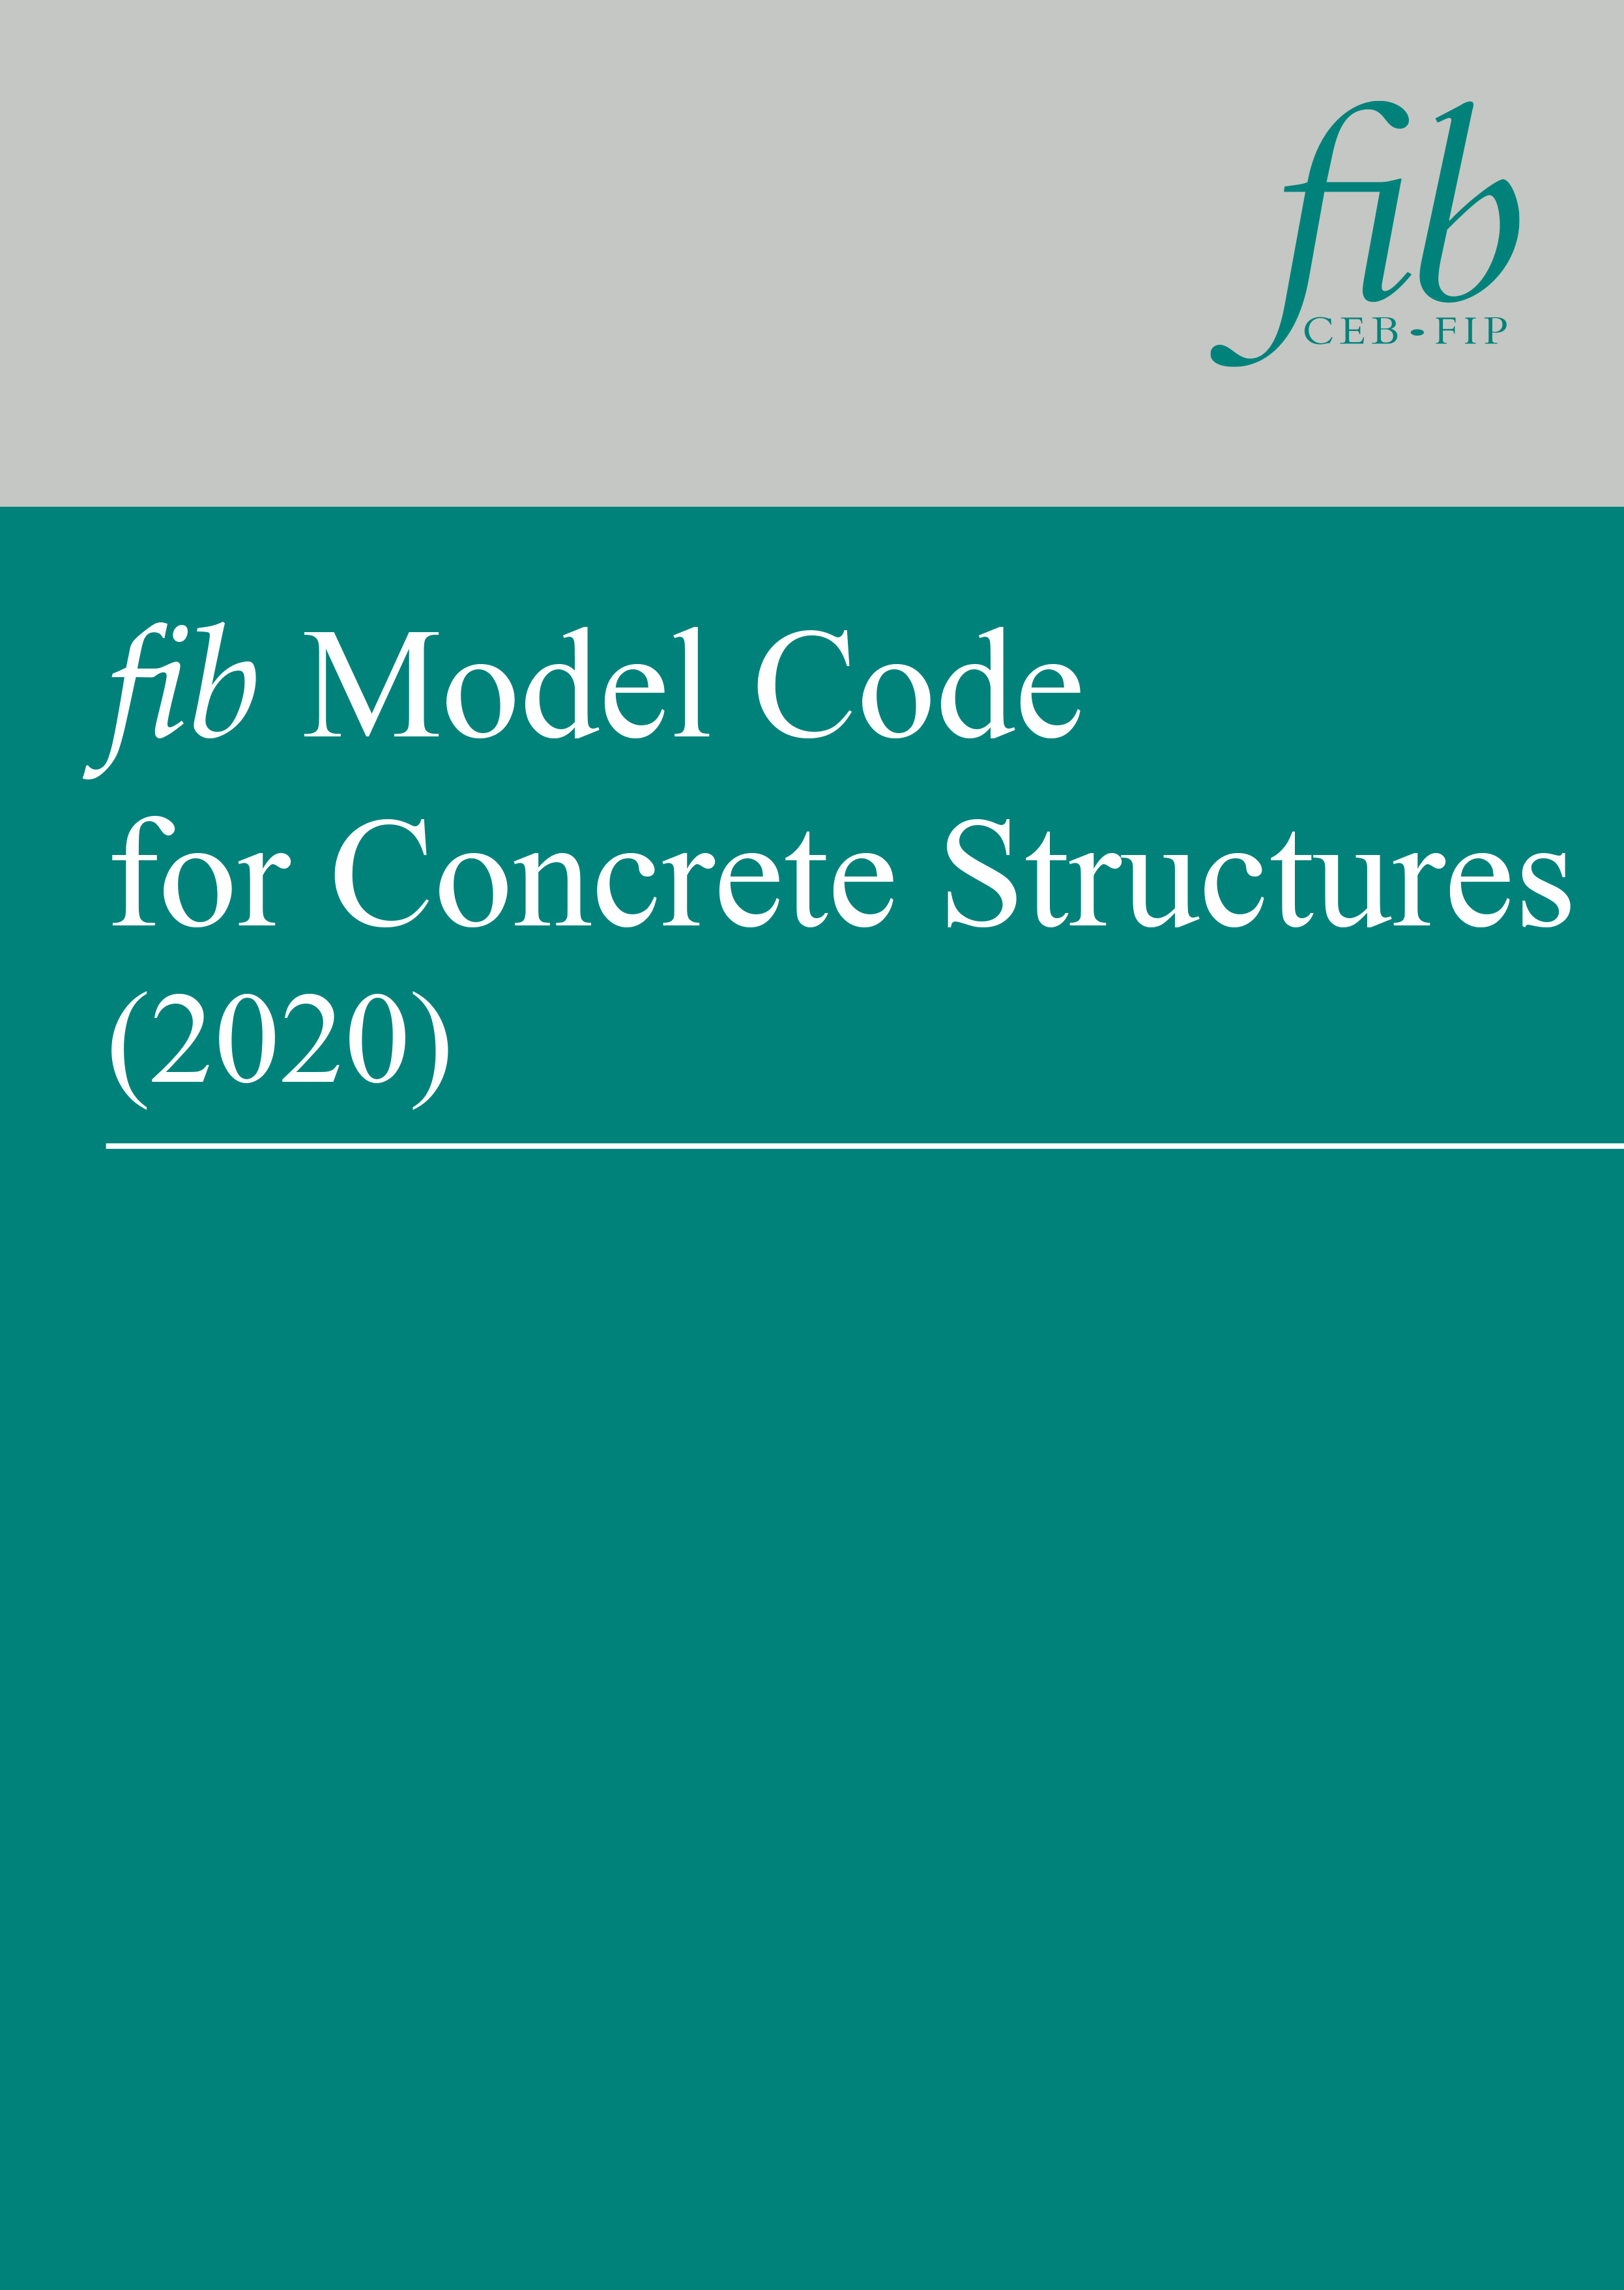 240208 model code cover v5 without lines copy